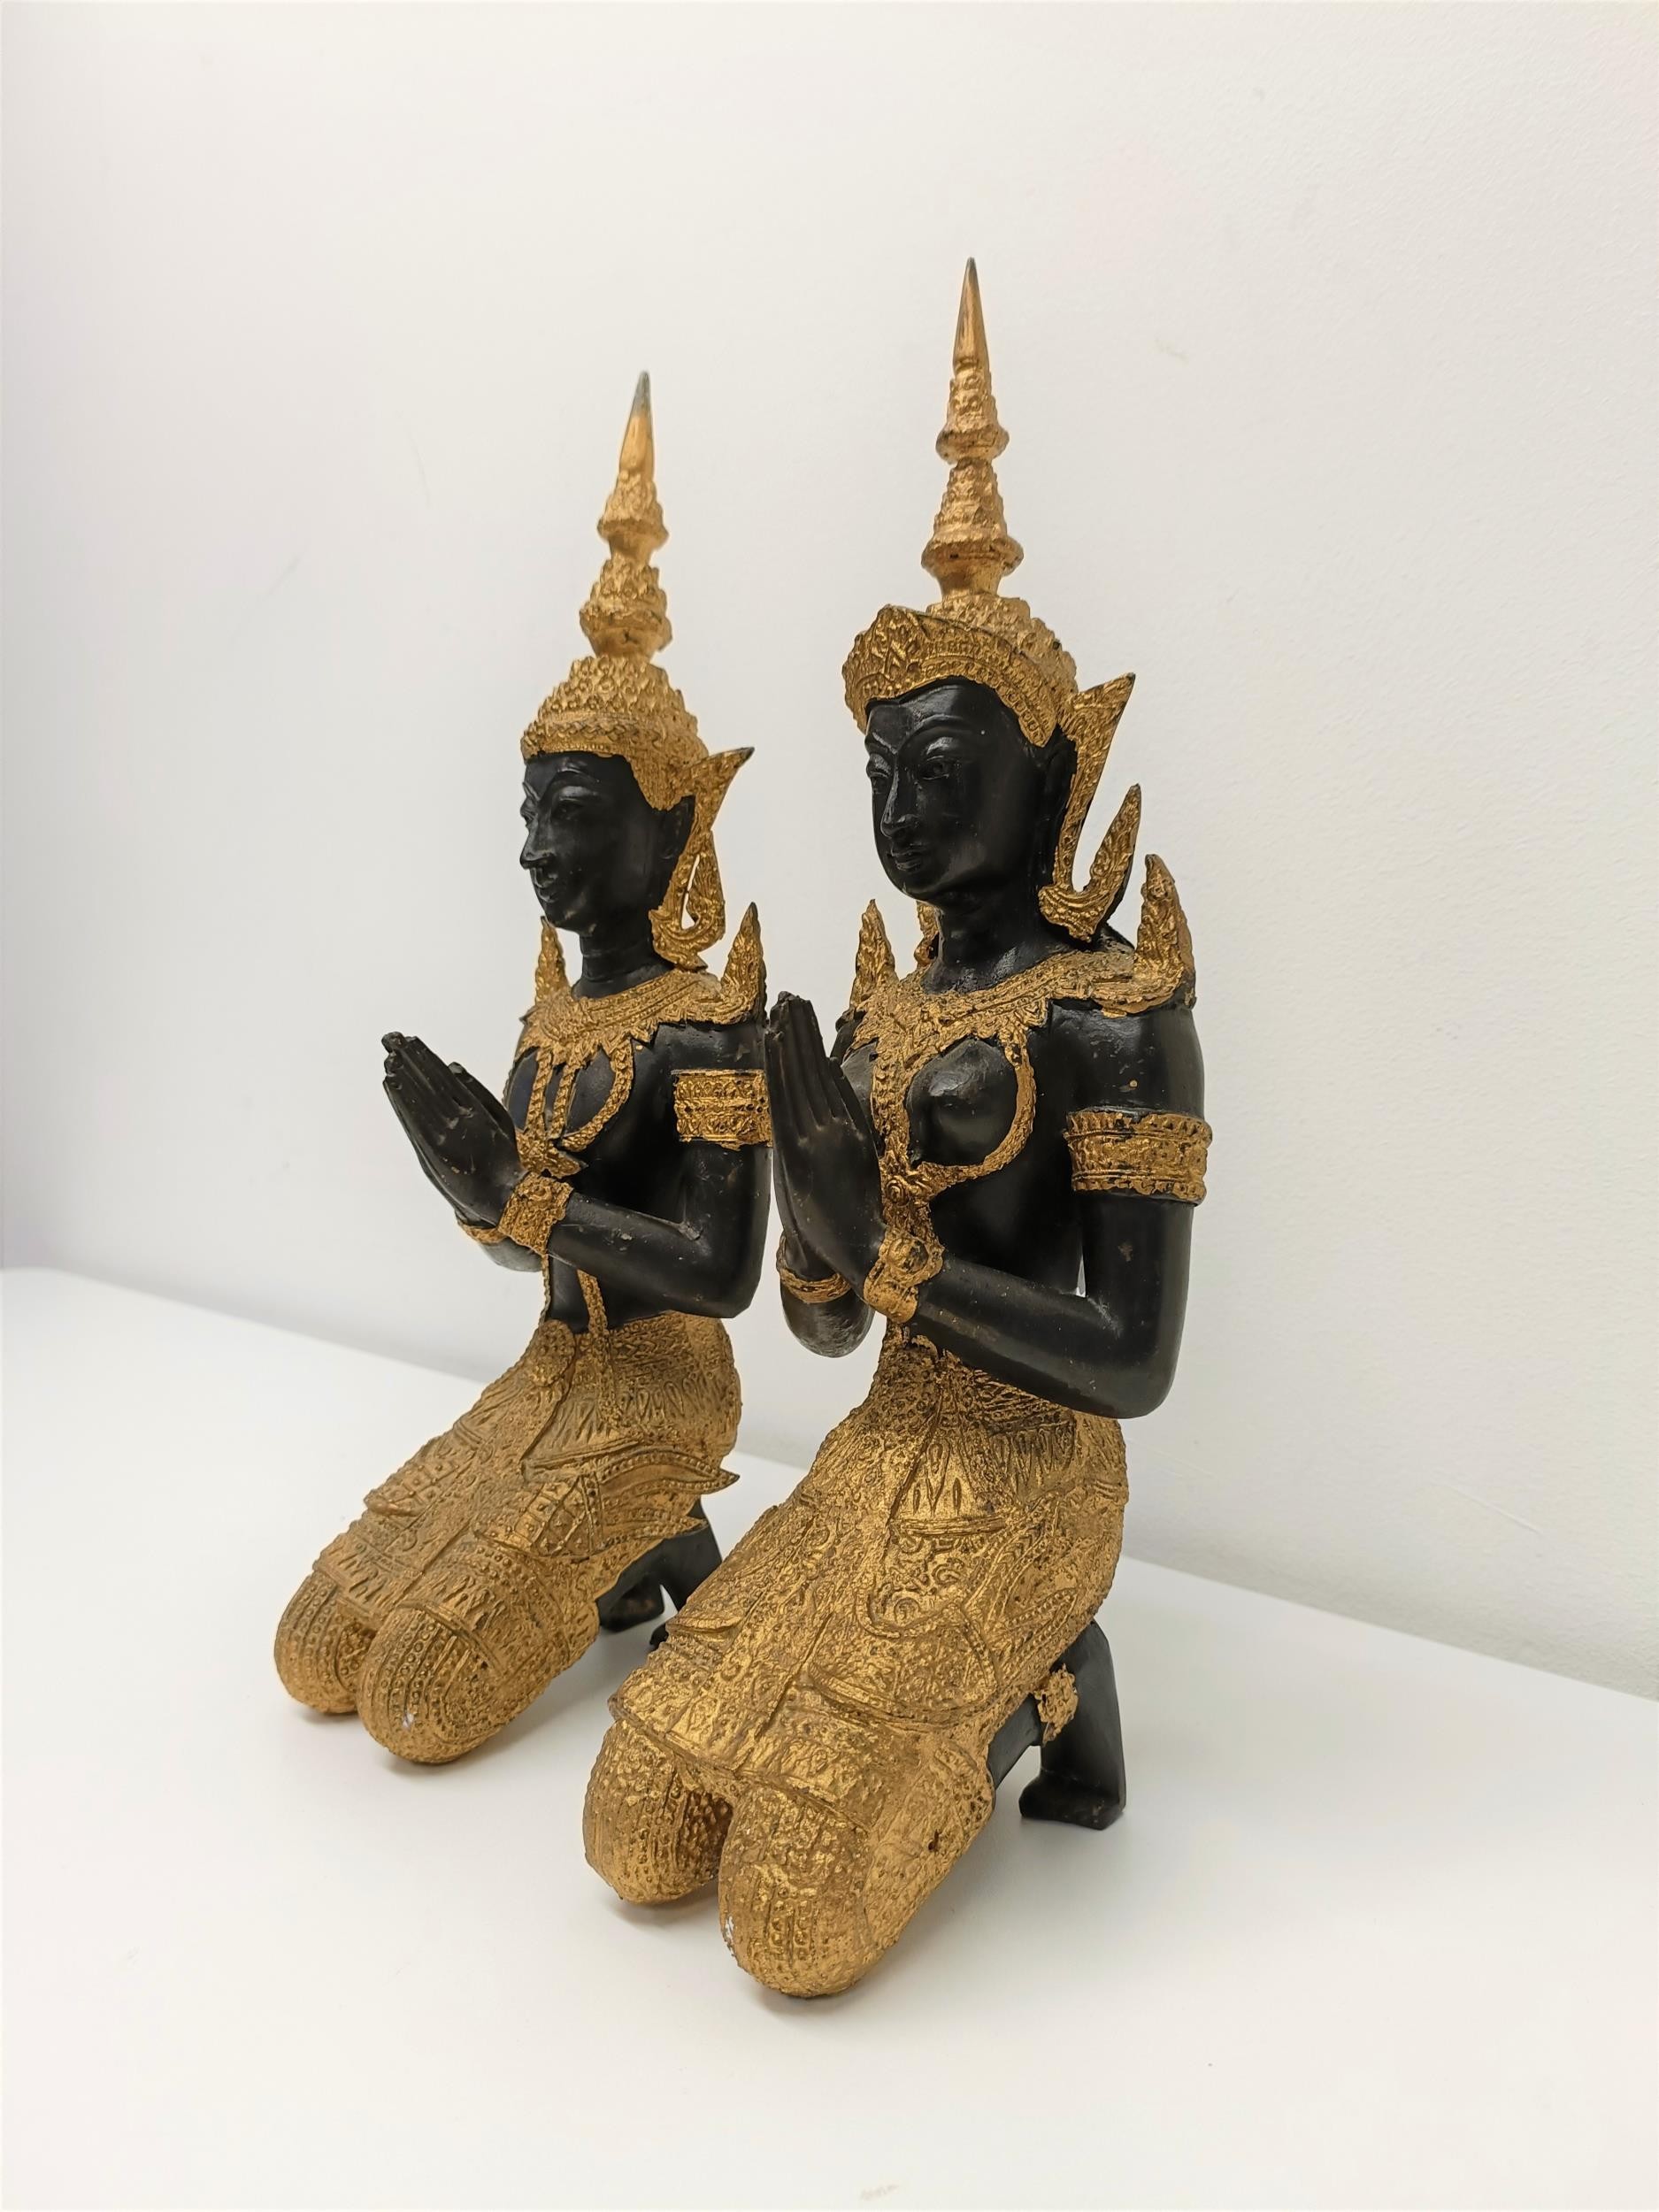 A pair of painted metal figures of goddesses, 33 cm high - Image 3 of 5